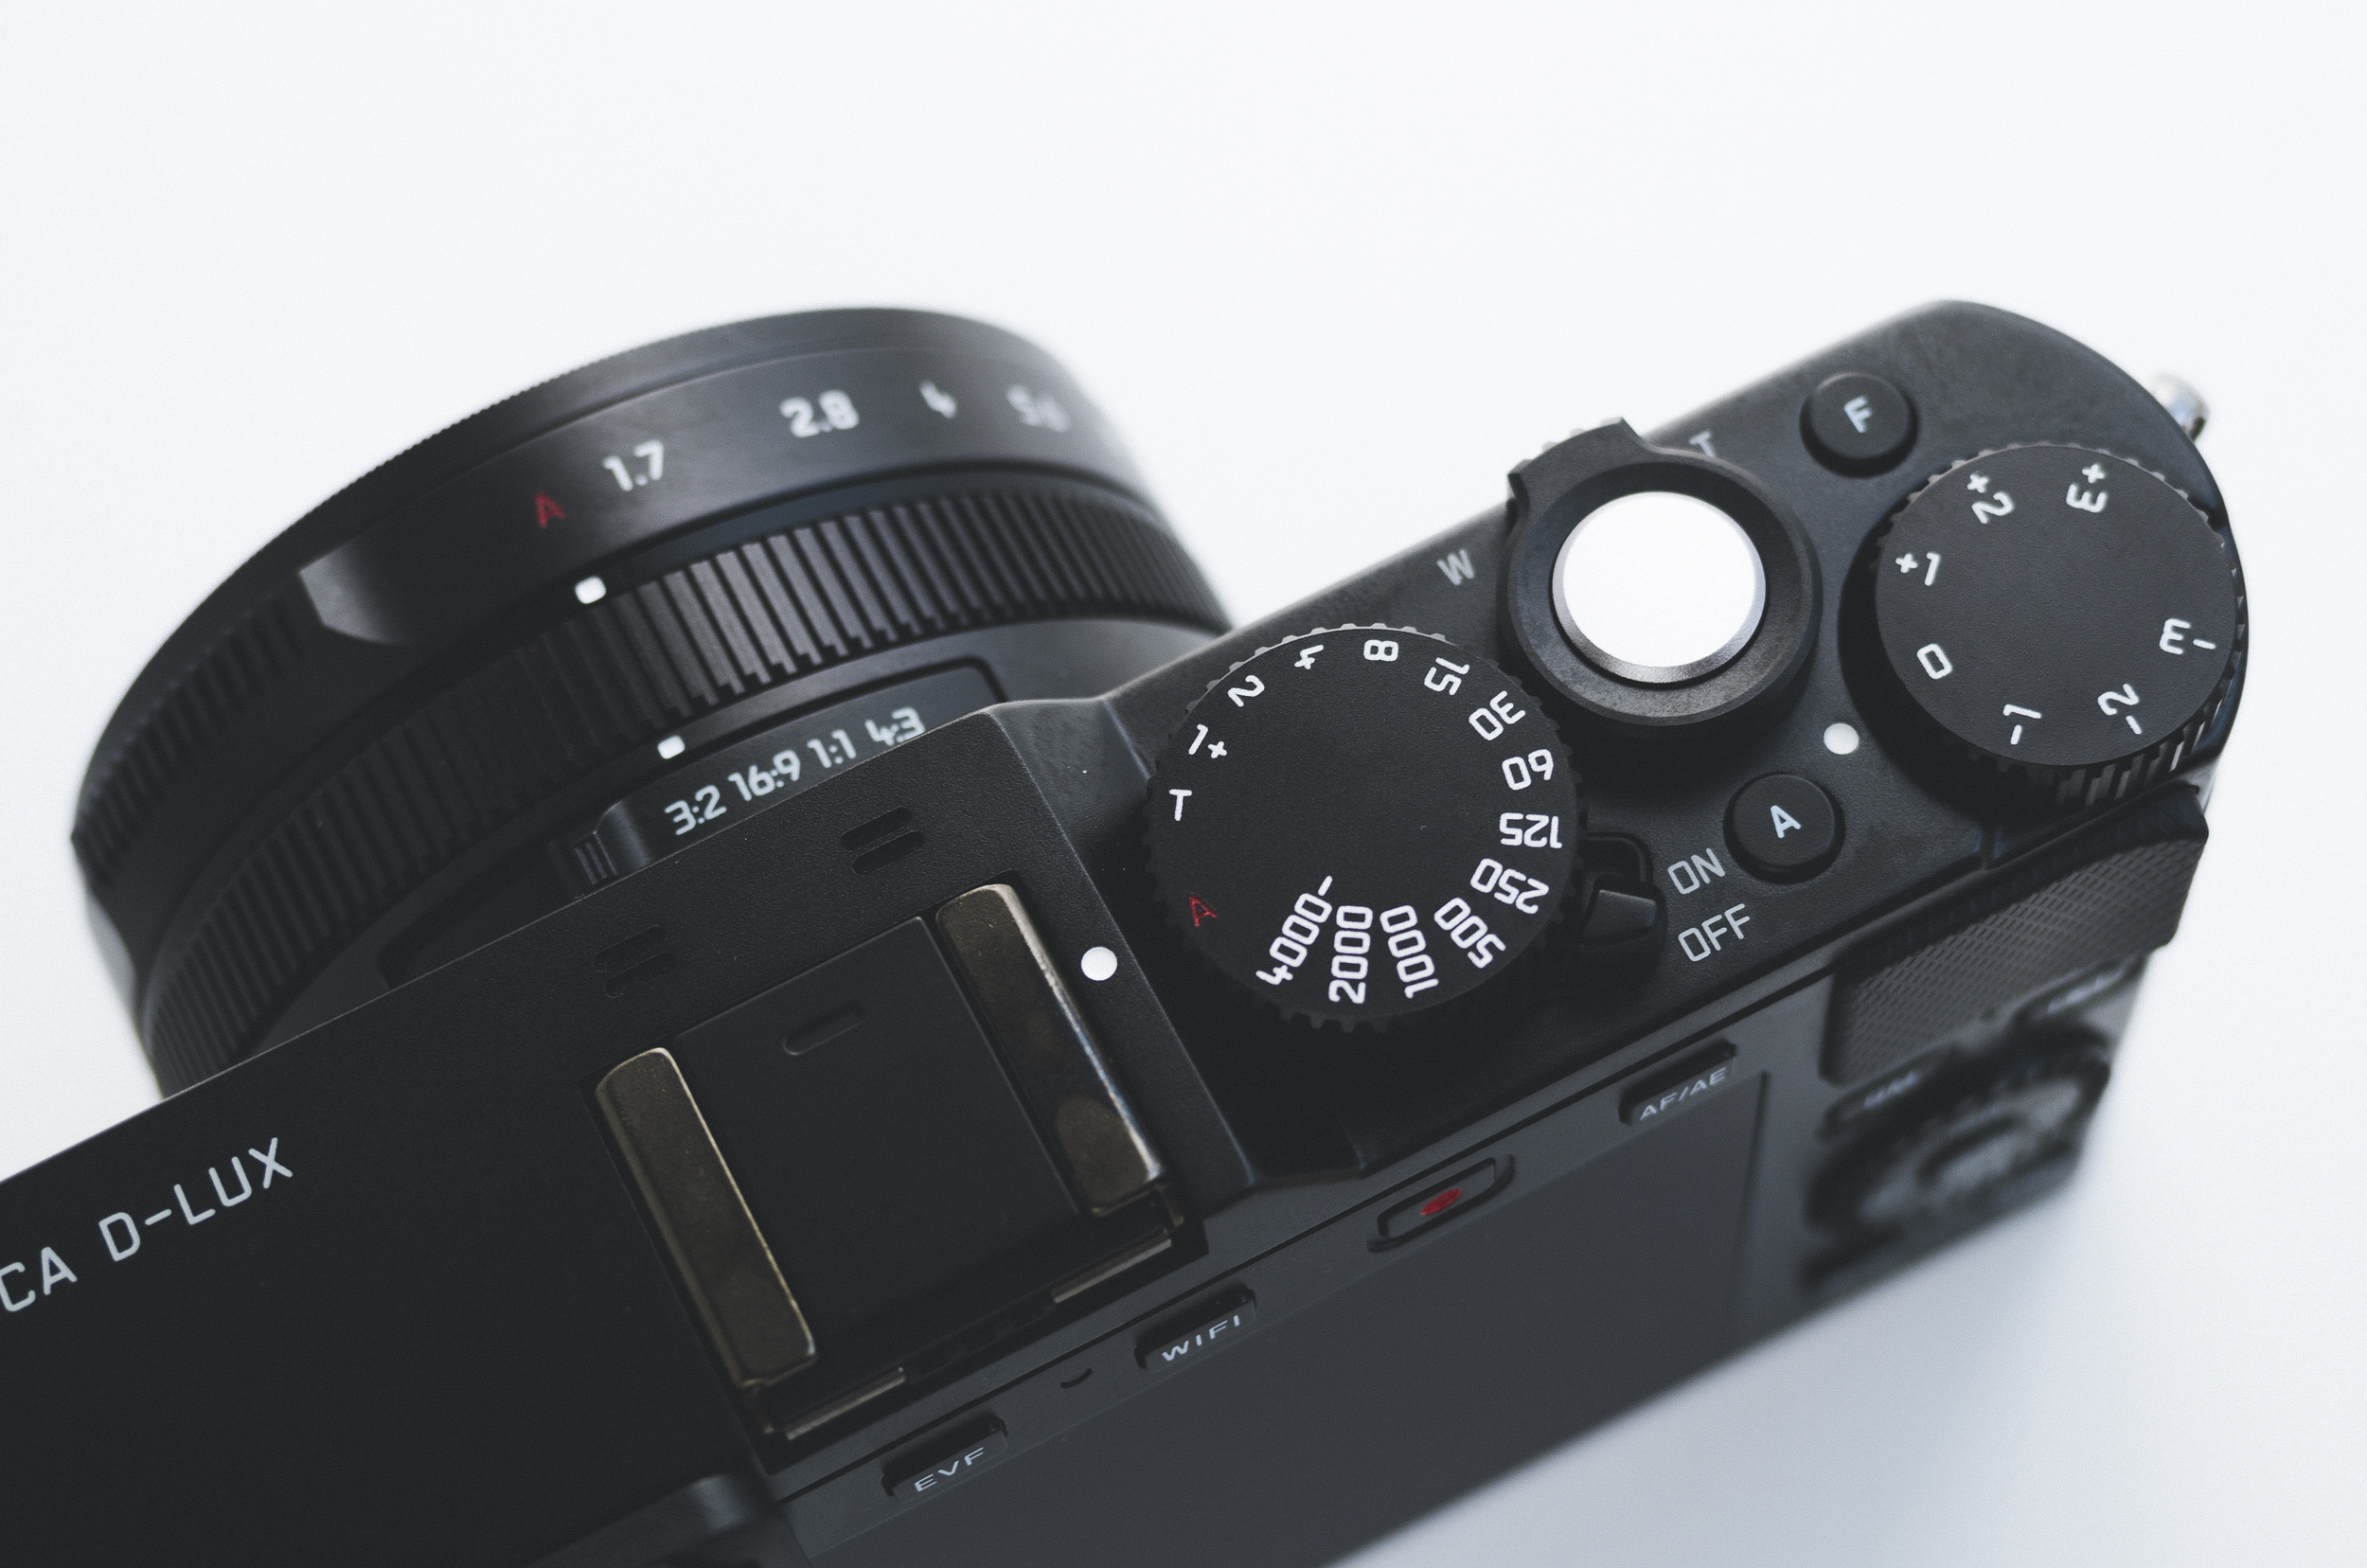 Leica D-LUX 3: Digital Photography Review